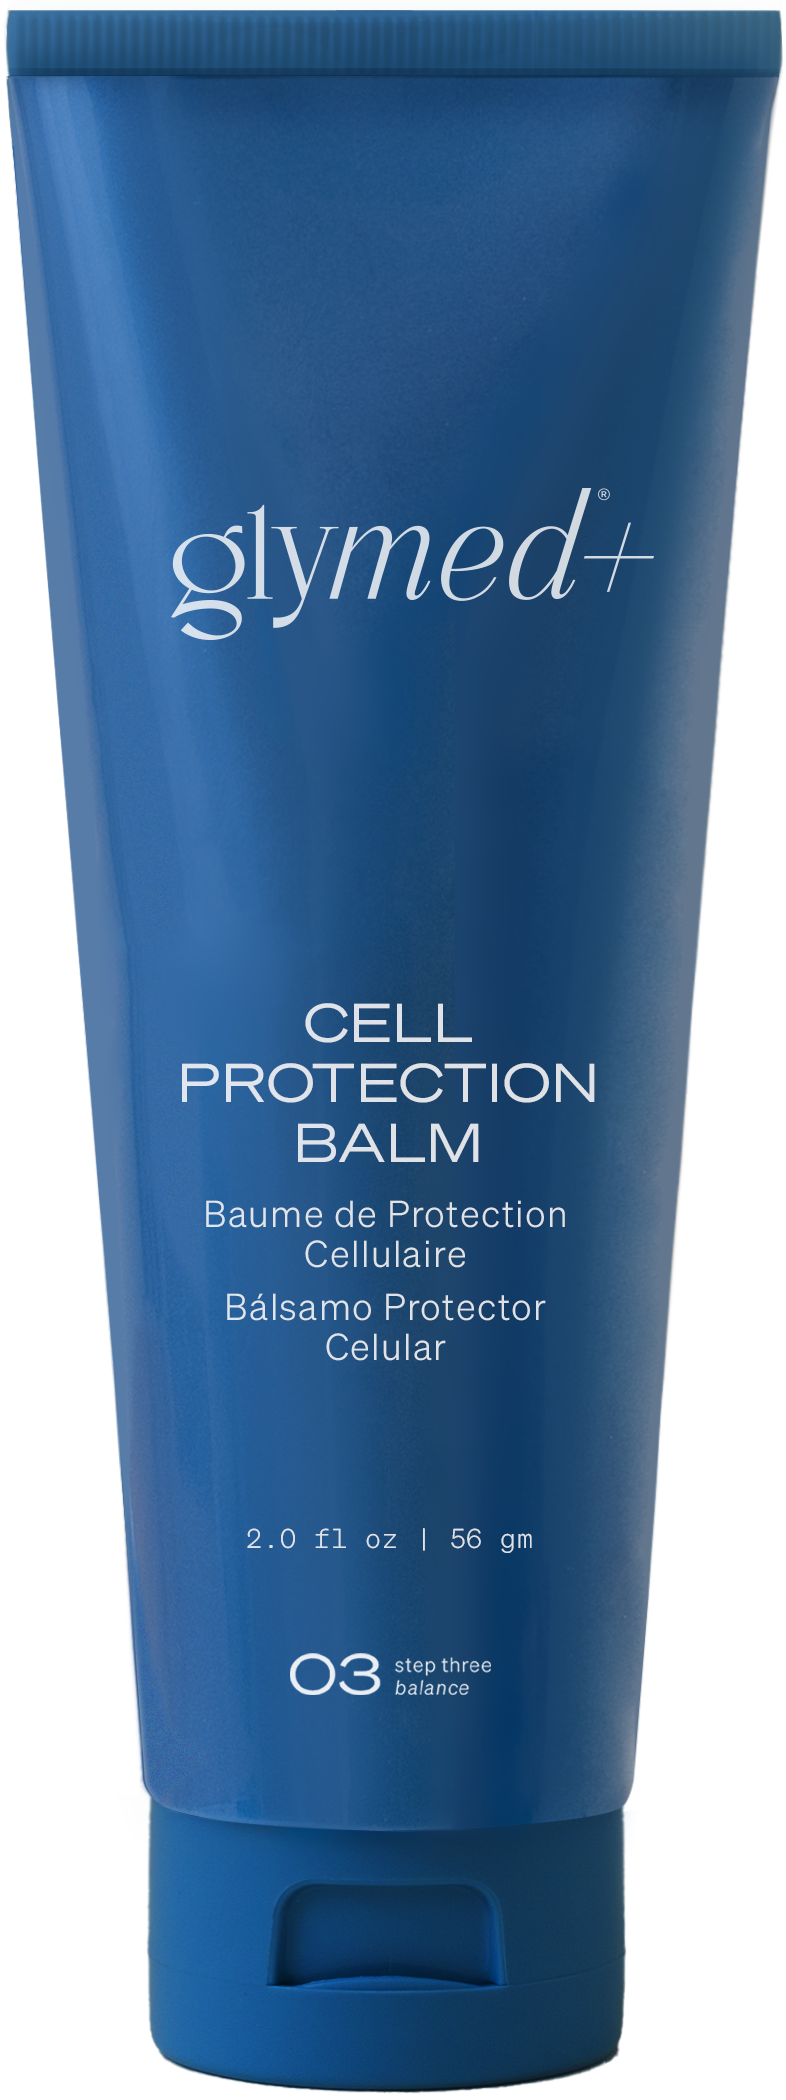 Cell Protection Balm